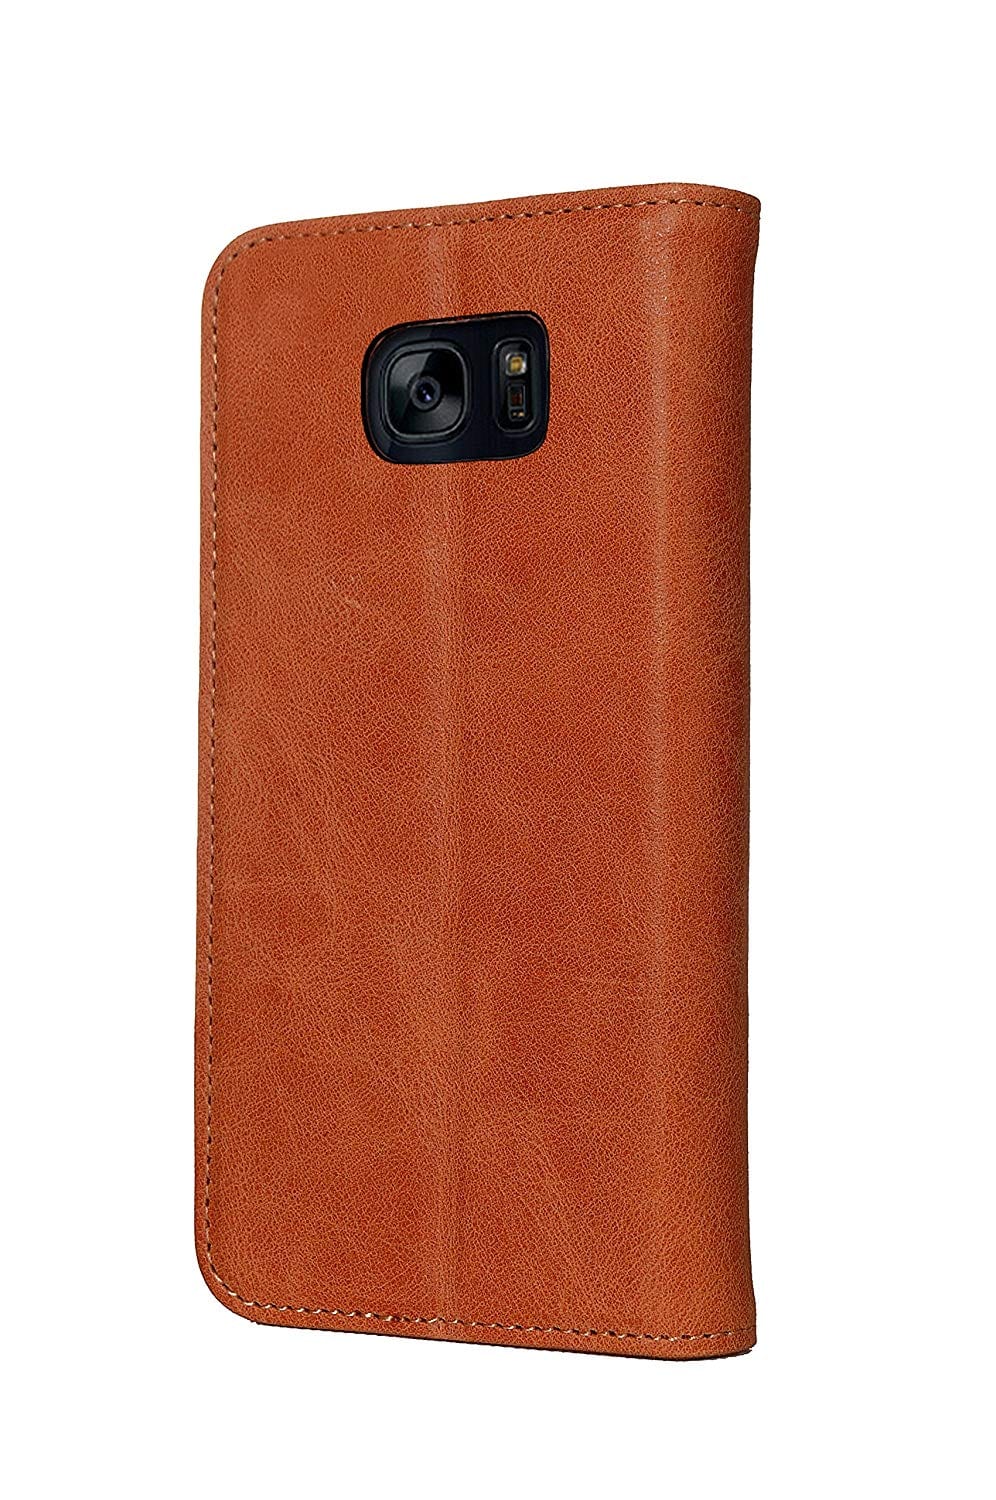 Samsung Galaxy S7 Edge Leather Case. Premium Slim Genuine Leather Stand Case/Cover/Wallet (Tan)